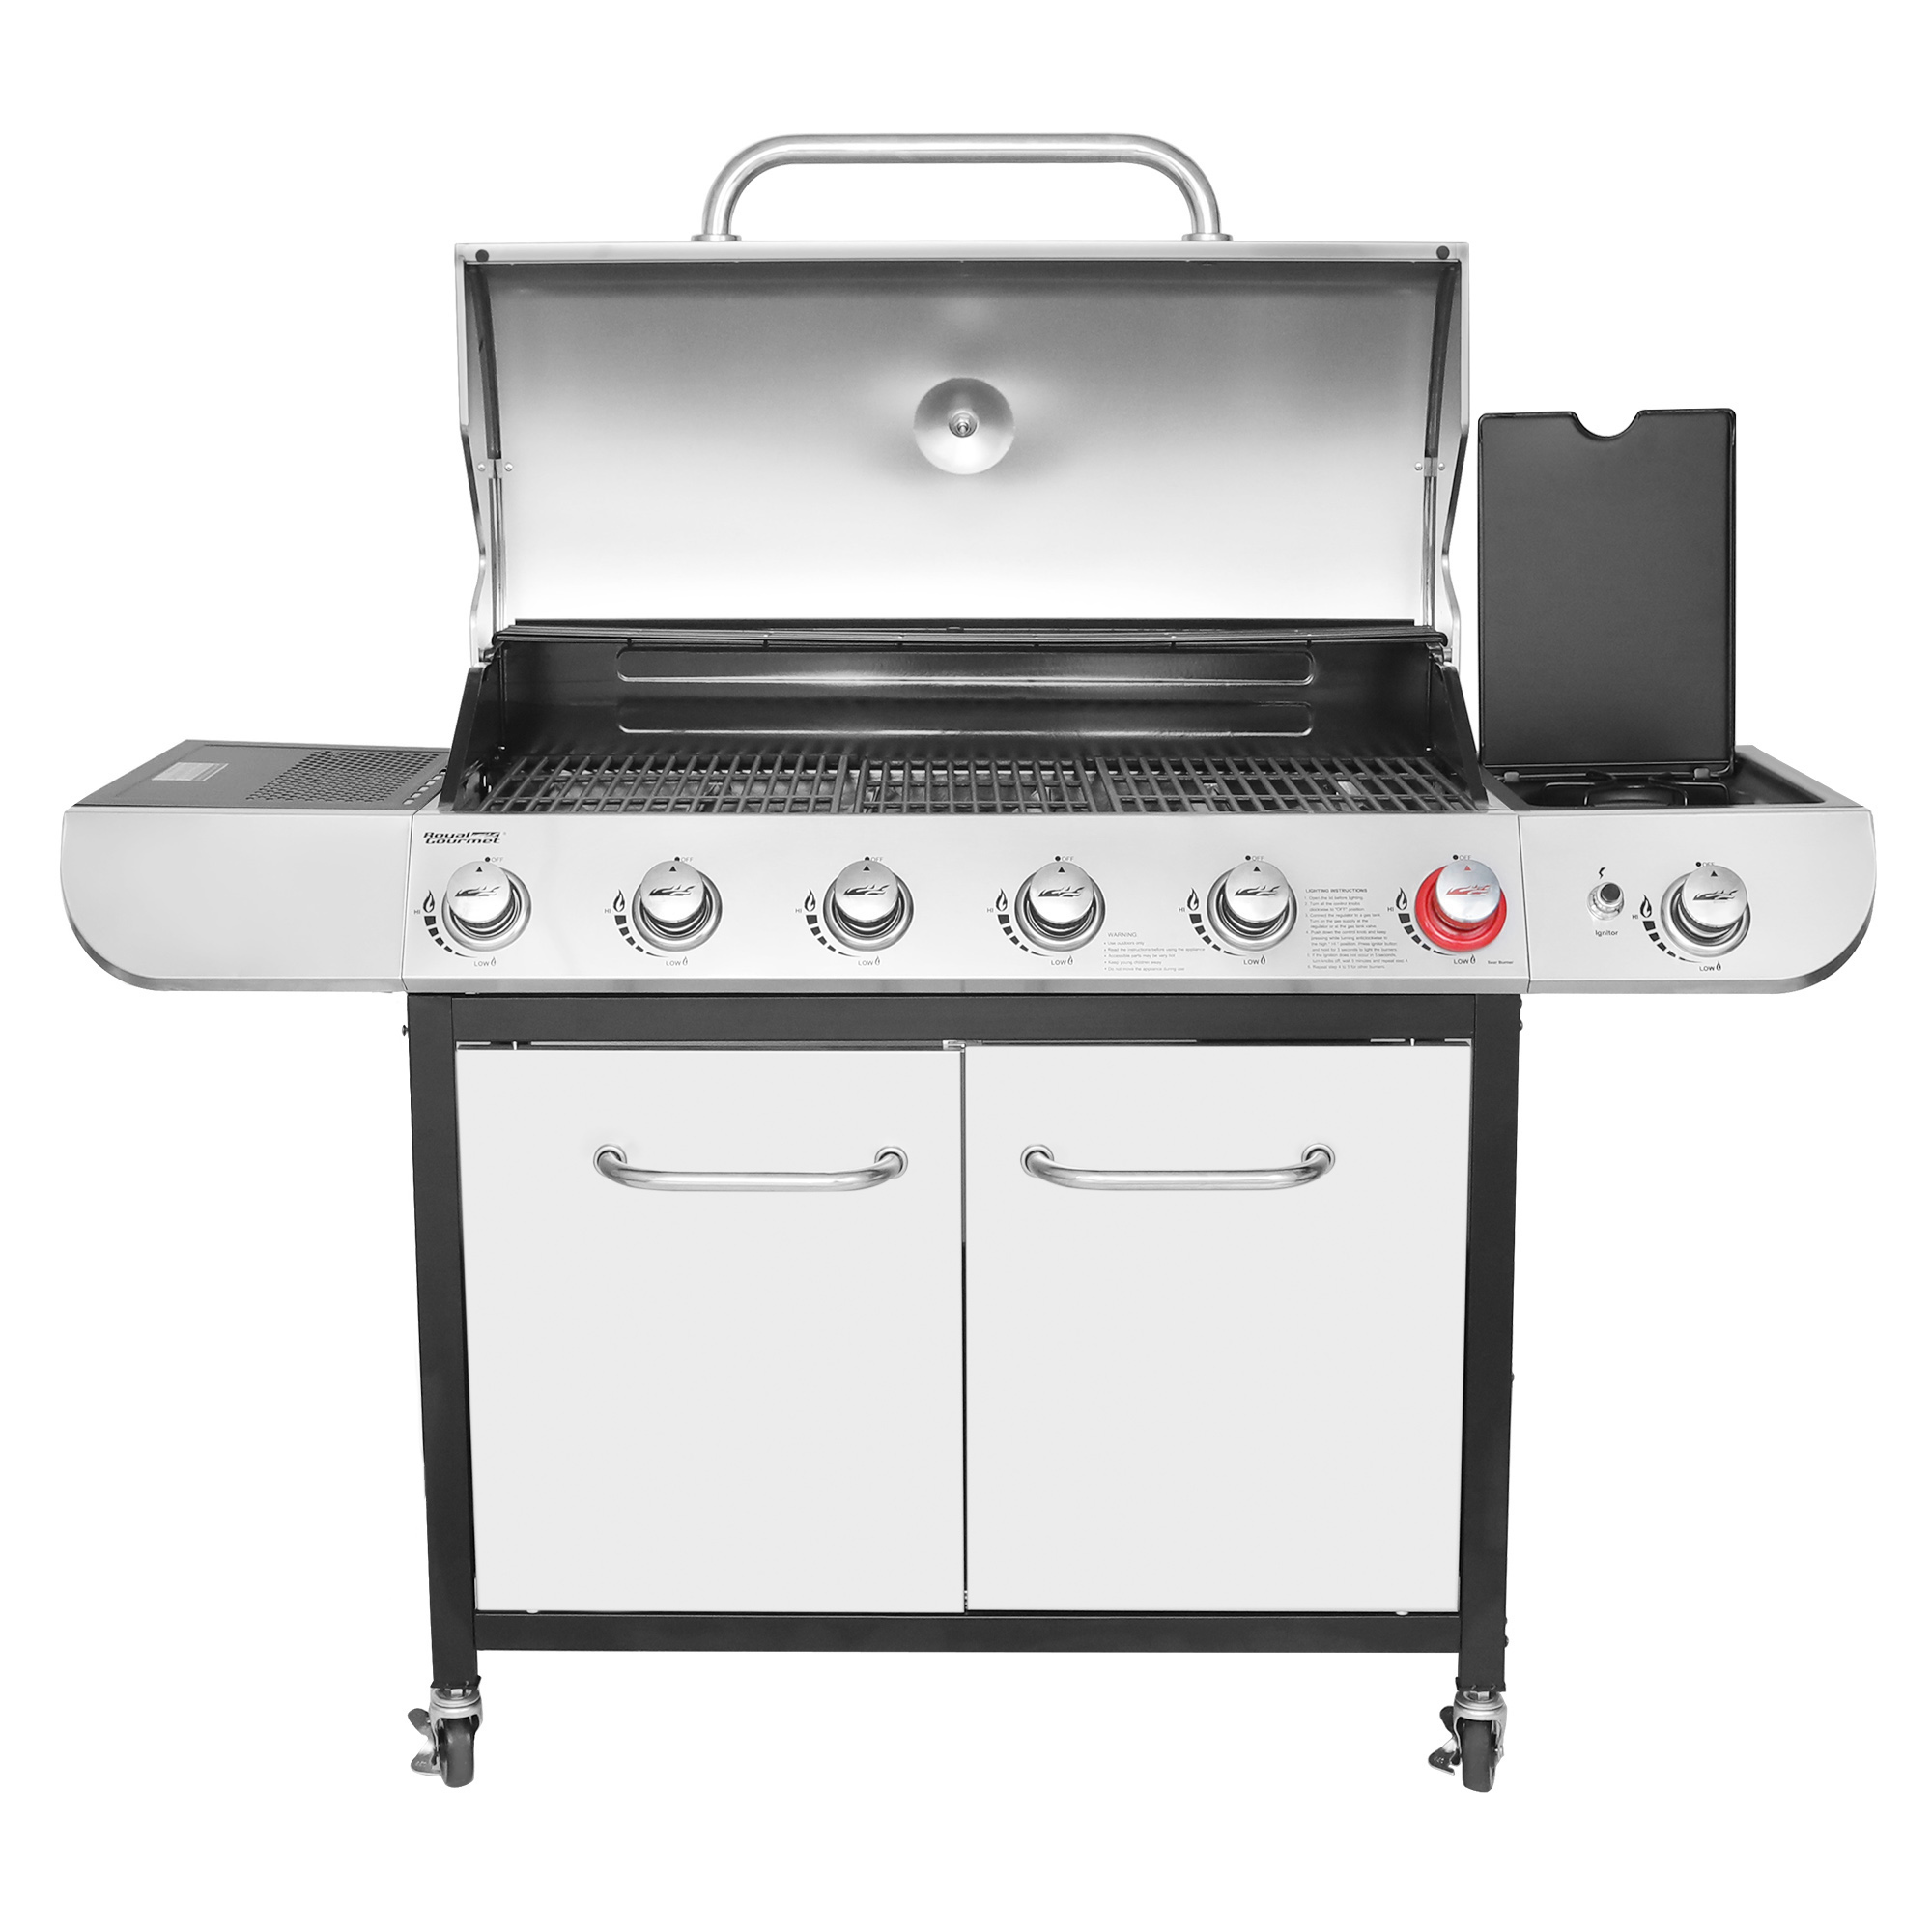 Royal Gourmet SG6002R 6-Burner BBQ Liquid Gas Grill with Sear and Side Burner, 71,000 BTU Cabinet Style Gas Grill, Outdoor Patio Garden Grill, Stainless Steel, Silver - image 3 of 8